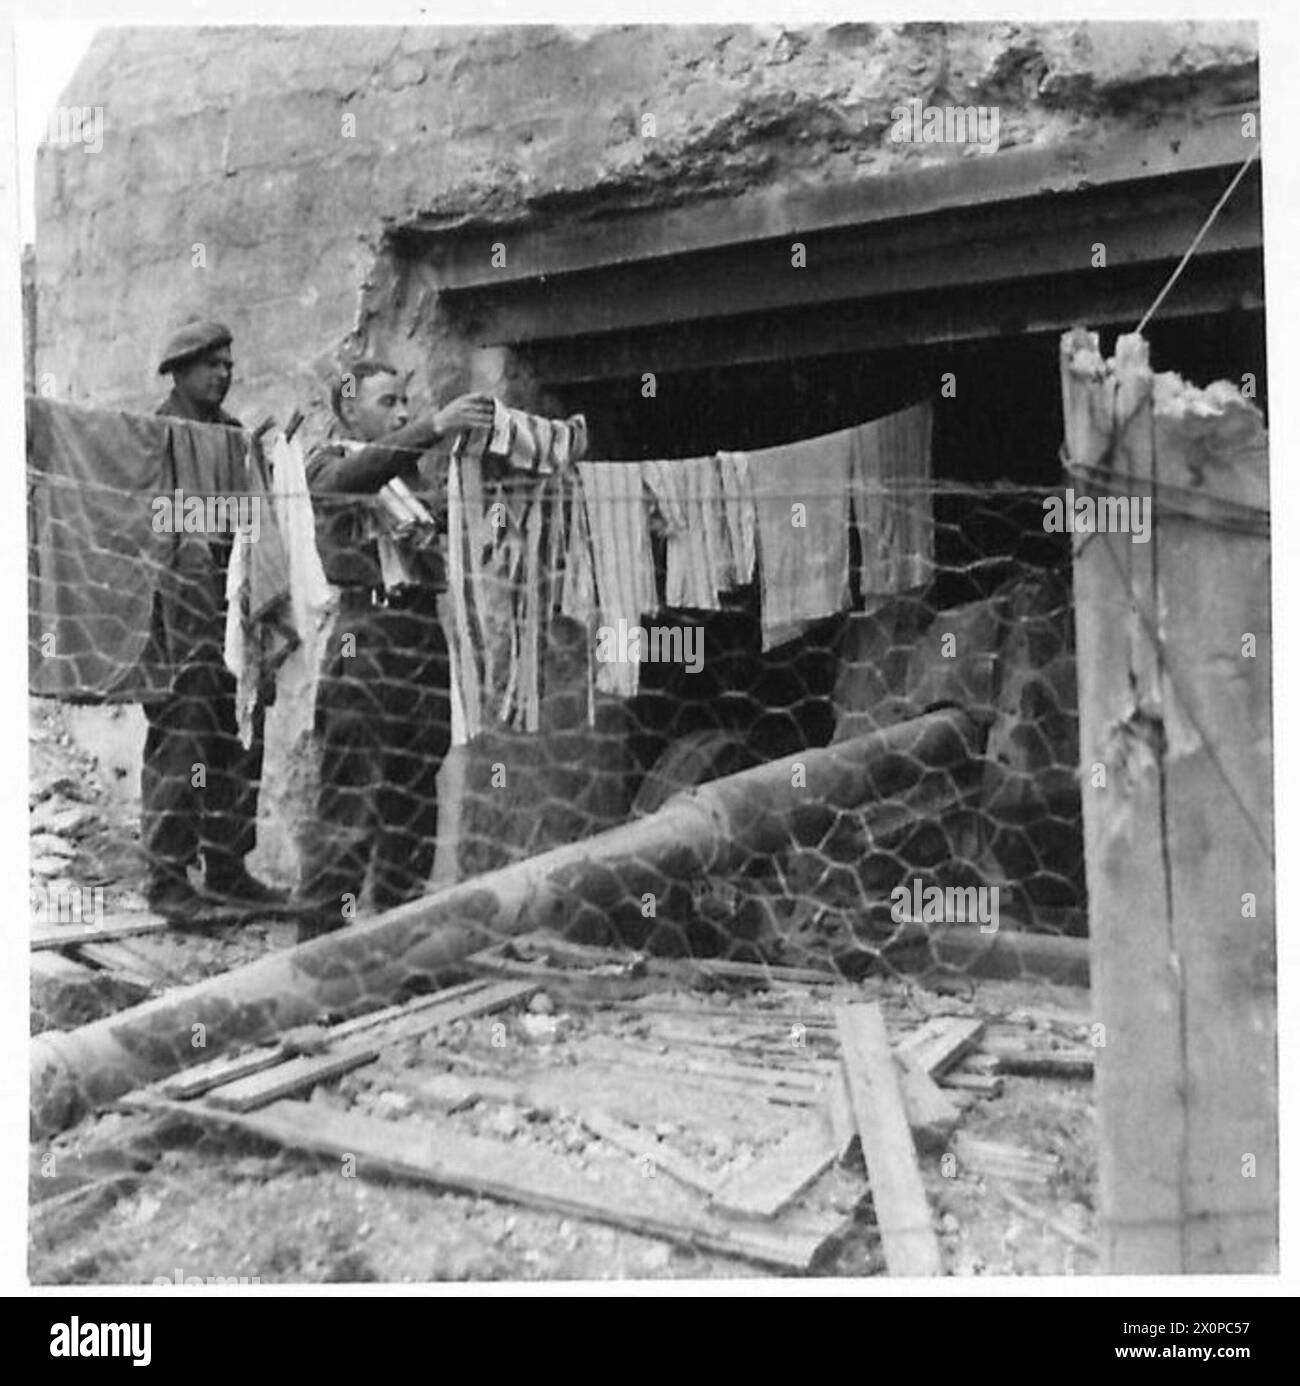 ALLIED FORCES IN THE NORMANDY CAMPAIGN 1944 - British troops hang their washing in front of a knocked-out German gun emplacement at Courseulles-sur-Mer, 11 June 1944. This Type 677 concrete emplacement was part of the WN-29 strongpoint at Courseulles. The gun is an 8.8cm Pak 43/41 Stock Photo